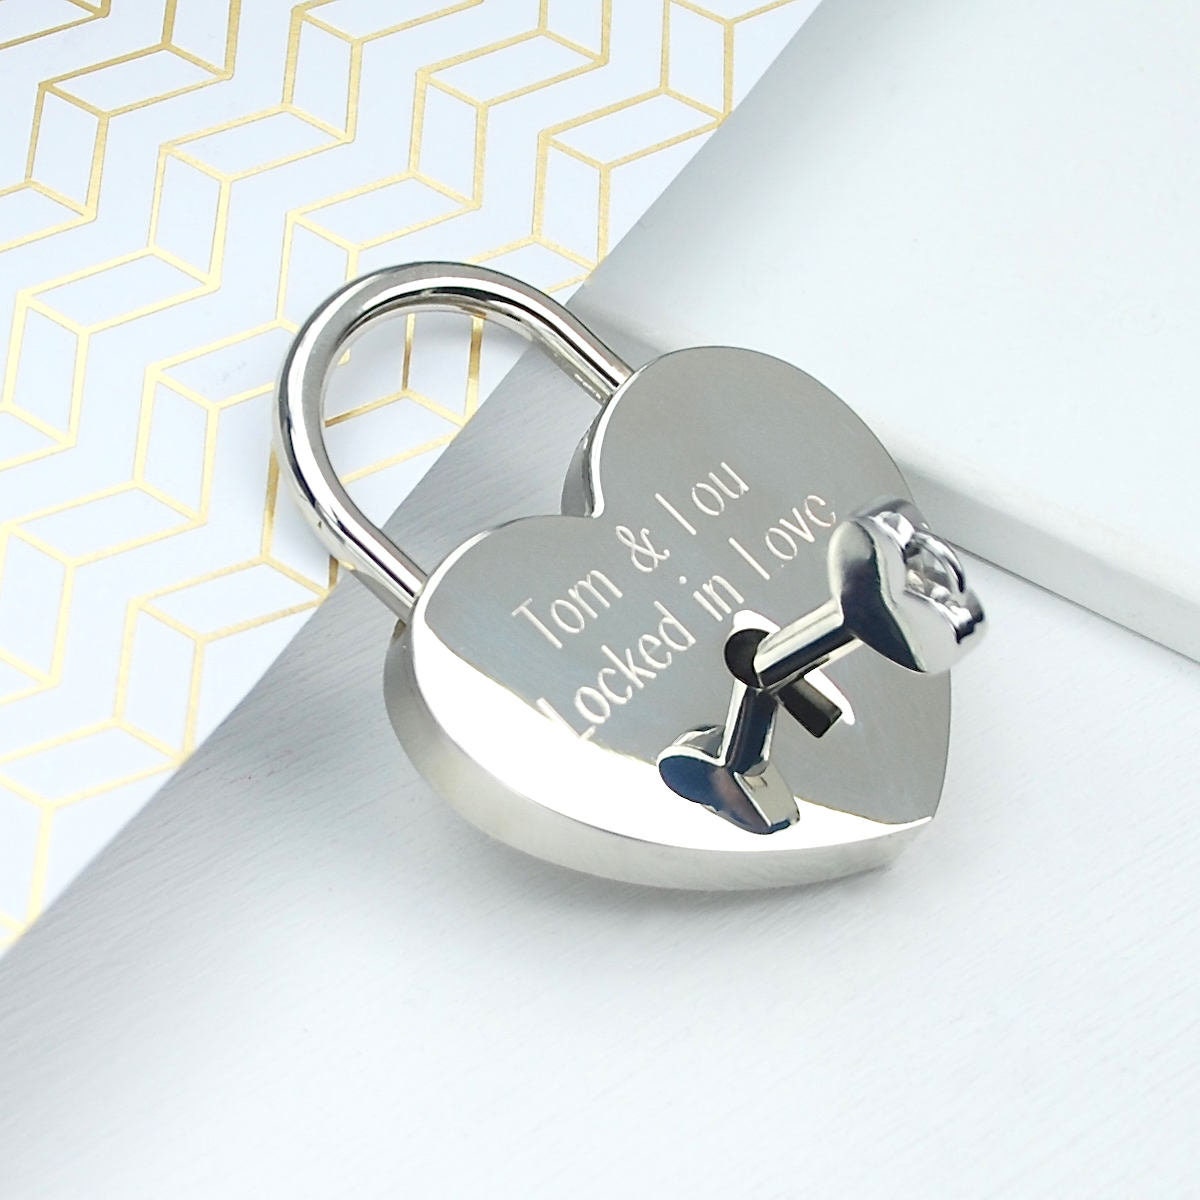 The lock and key necklace is linked to love, security, power and